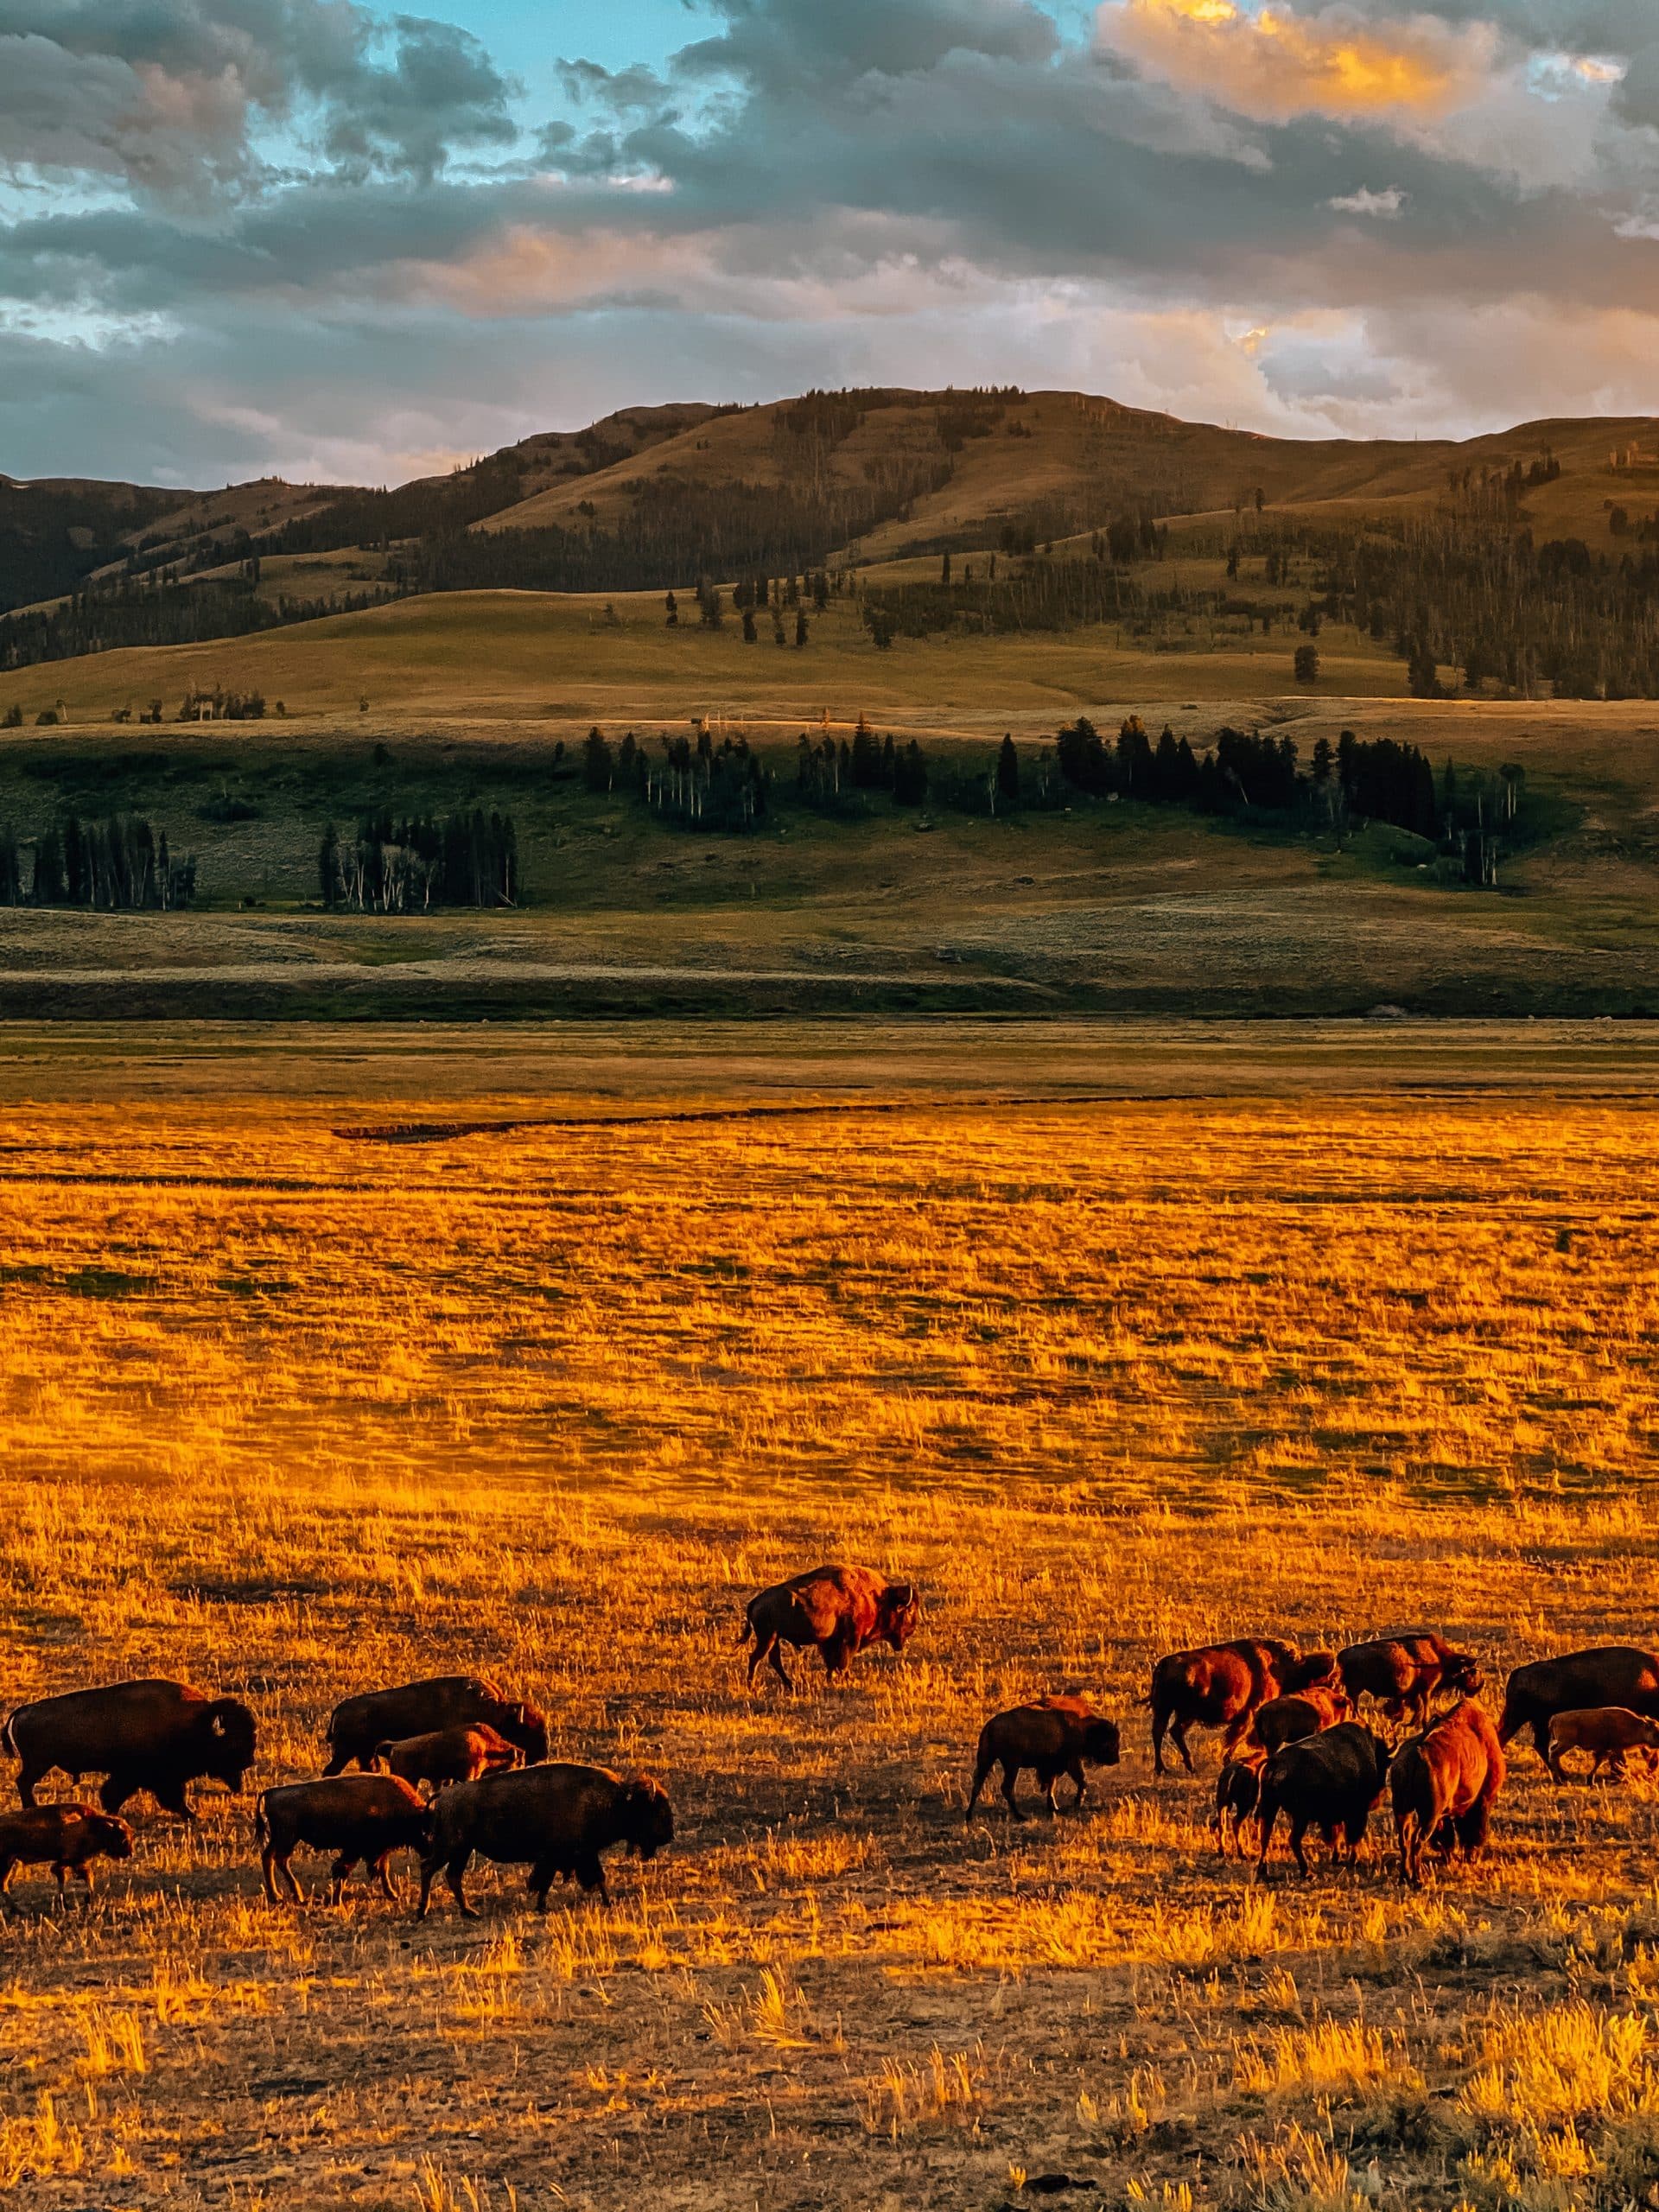 Lots of bison at sunset in Yellowstone